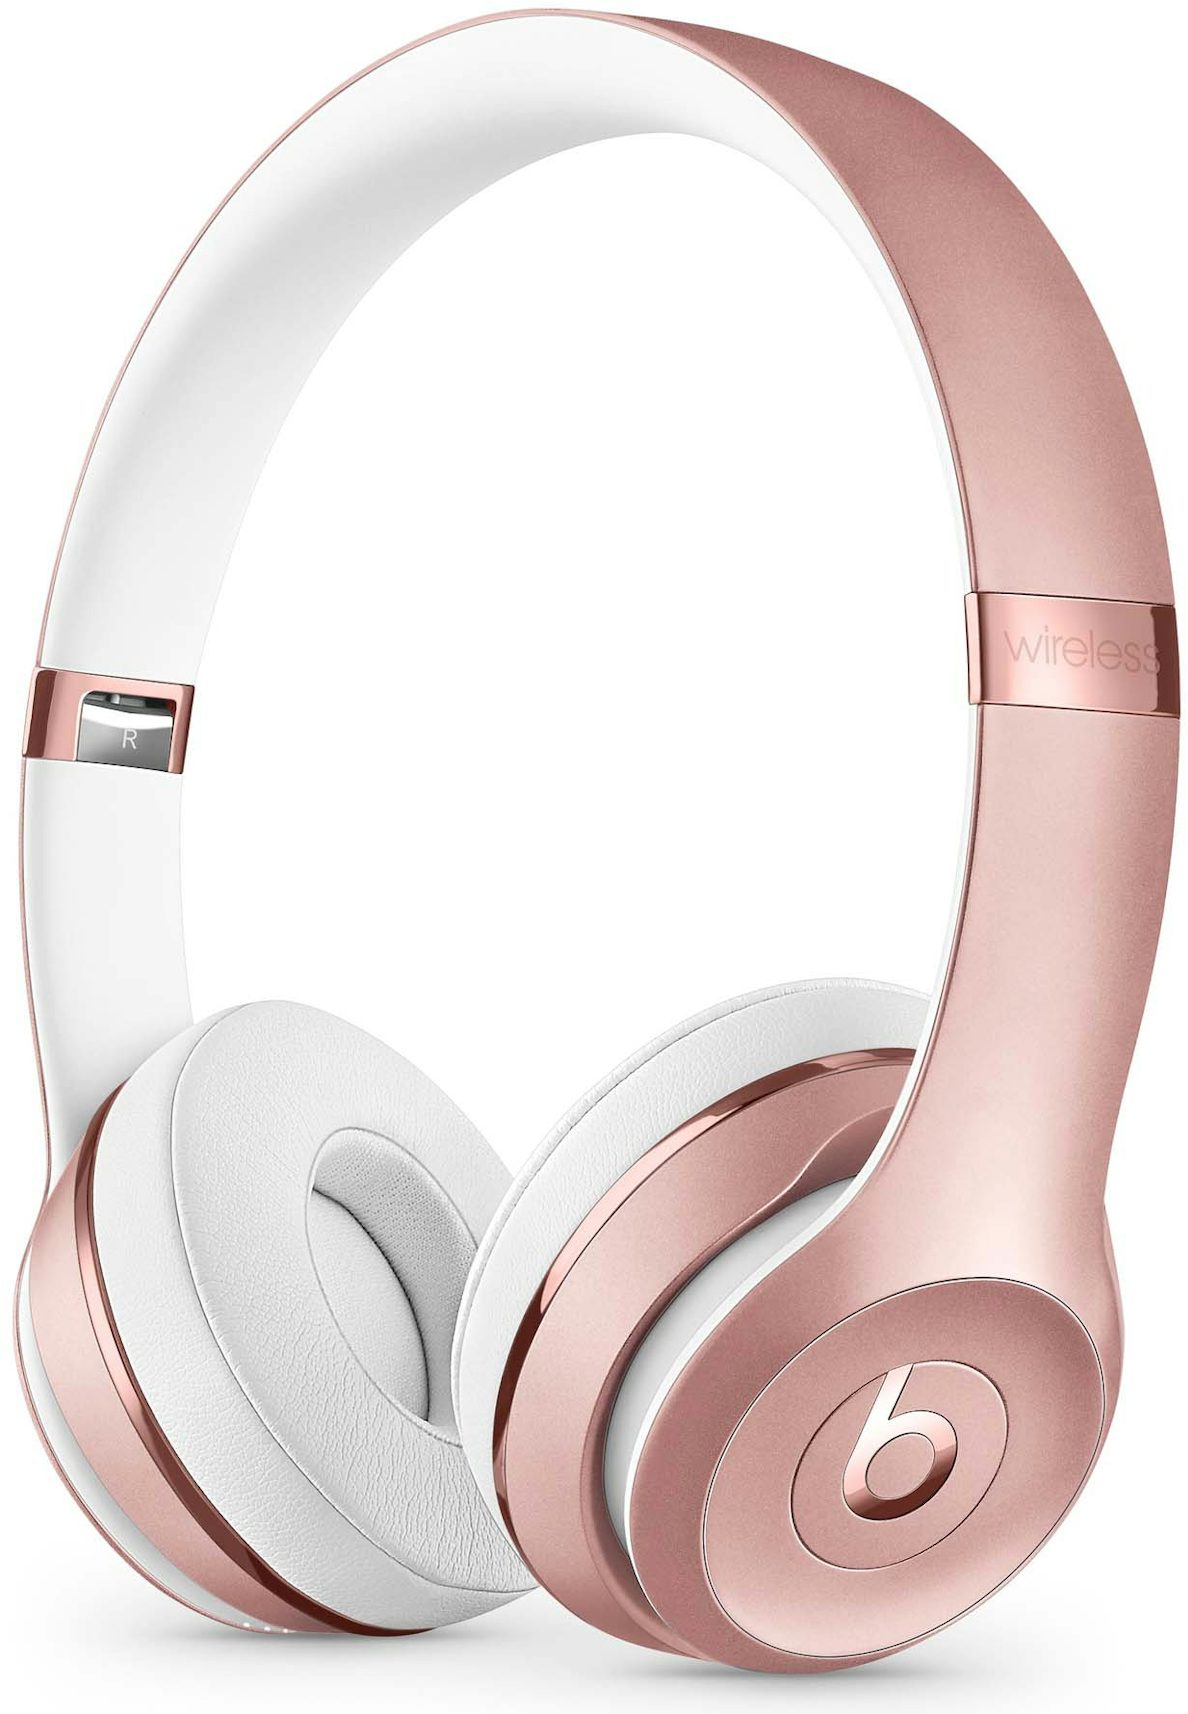 Beats by Dr. Dre Solo3 Wireless Headphones MX442LL/A Rose Gold - US